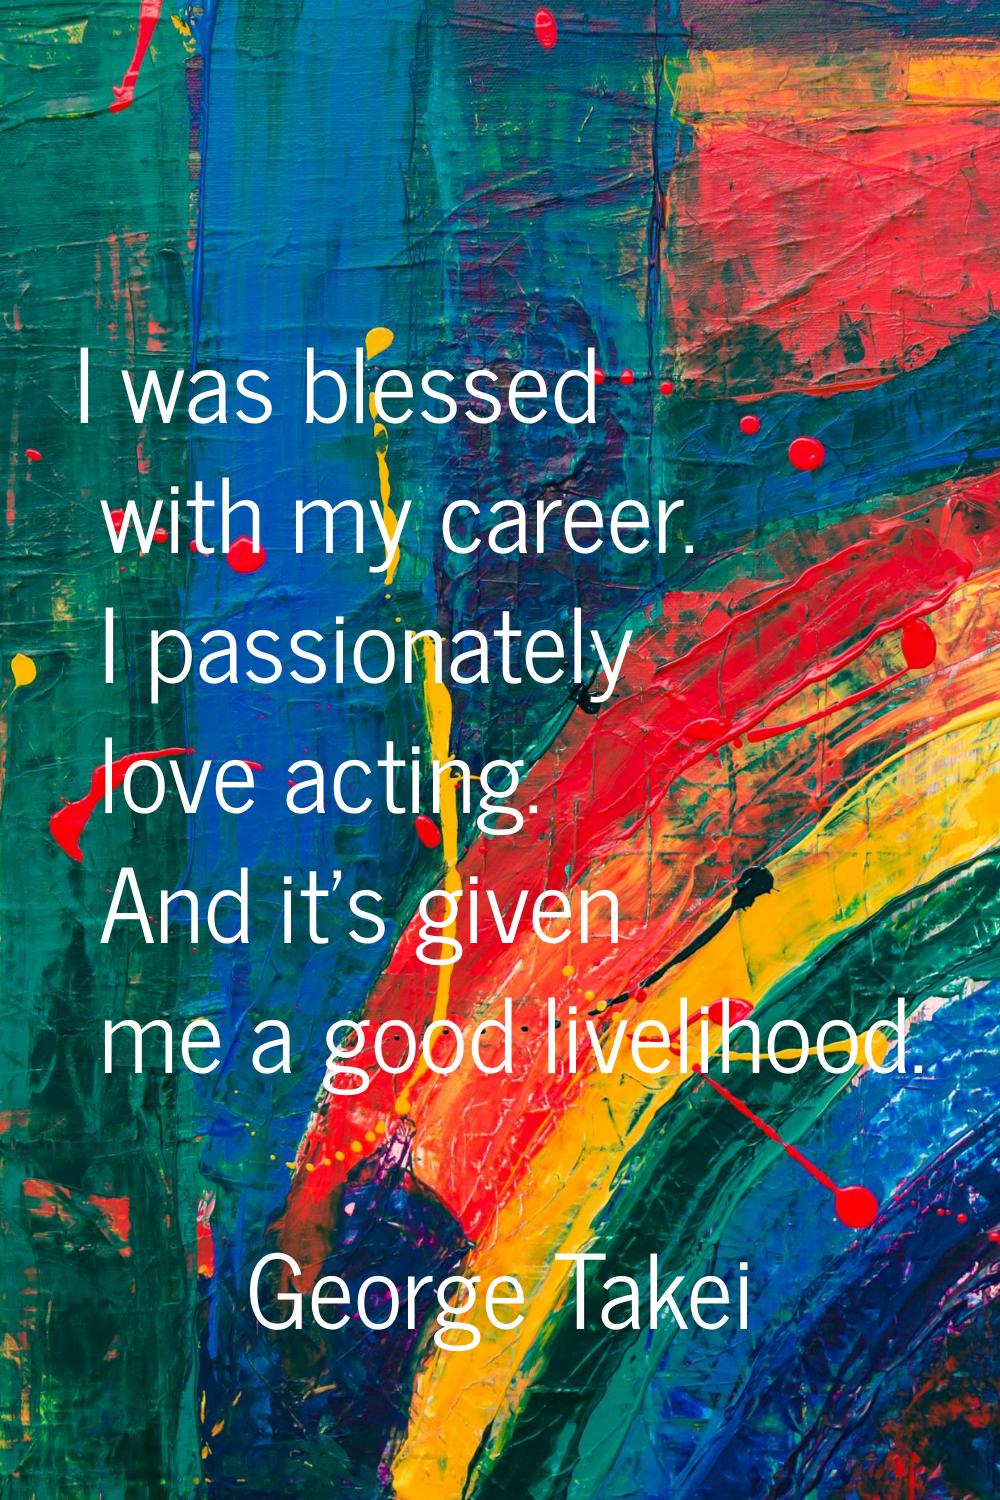 I was blessed with my career. I passionately love acting. And it's given me a good livelihood.